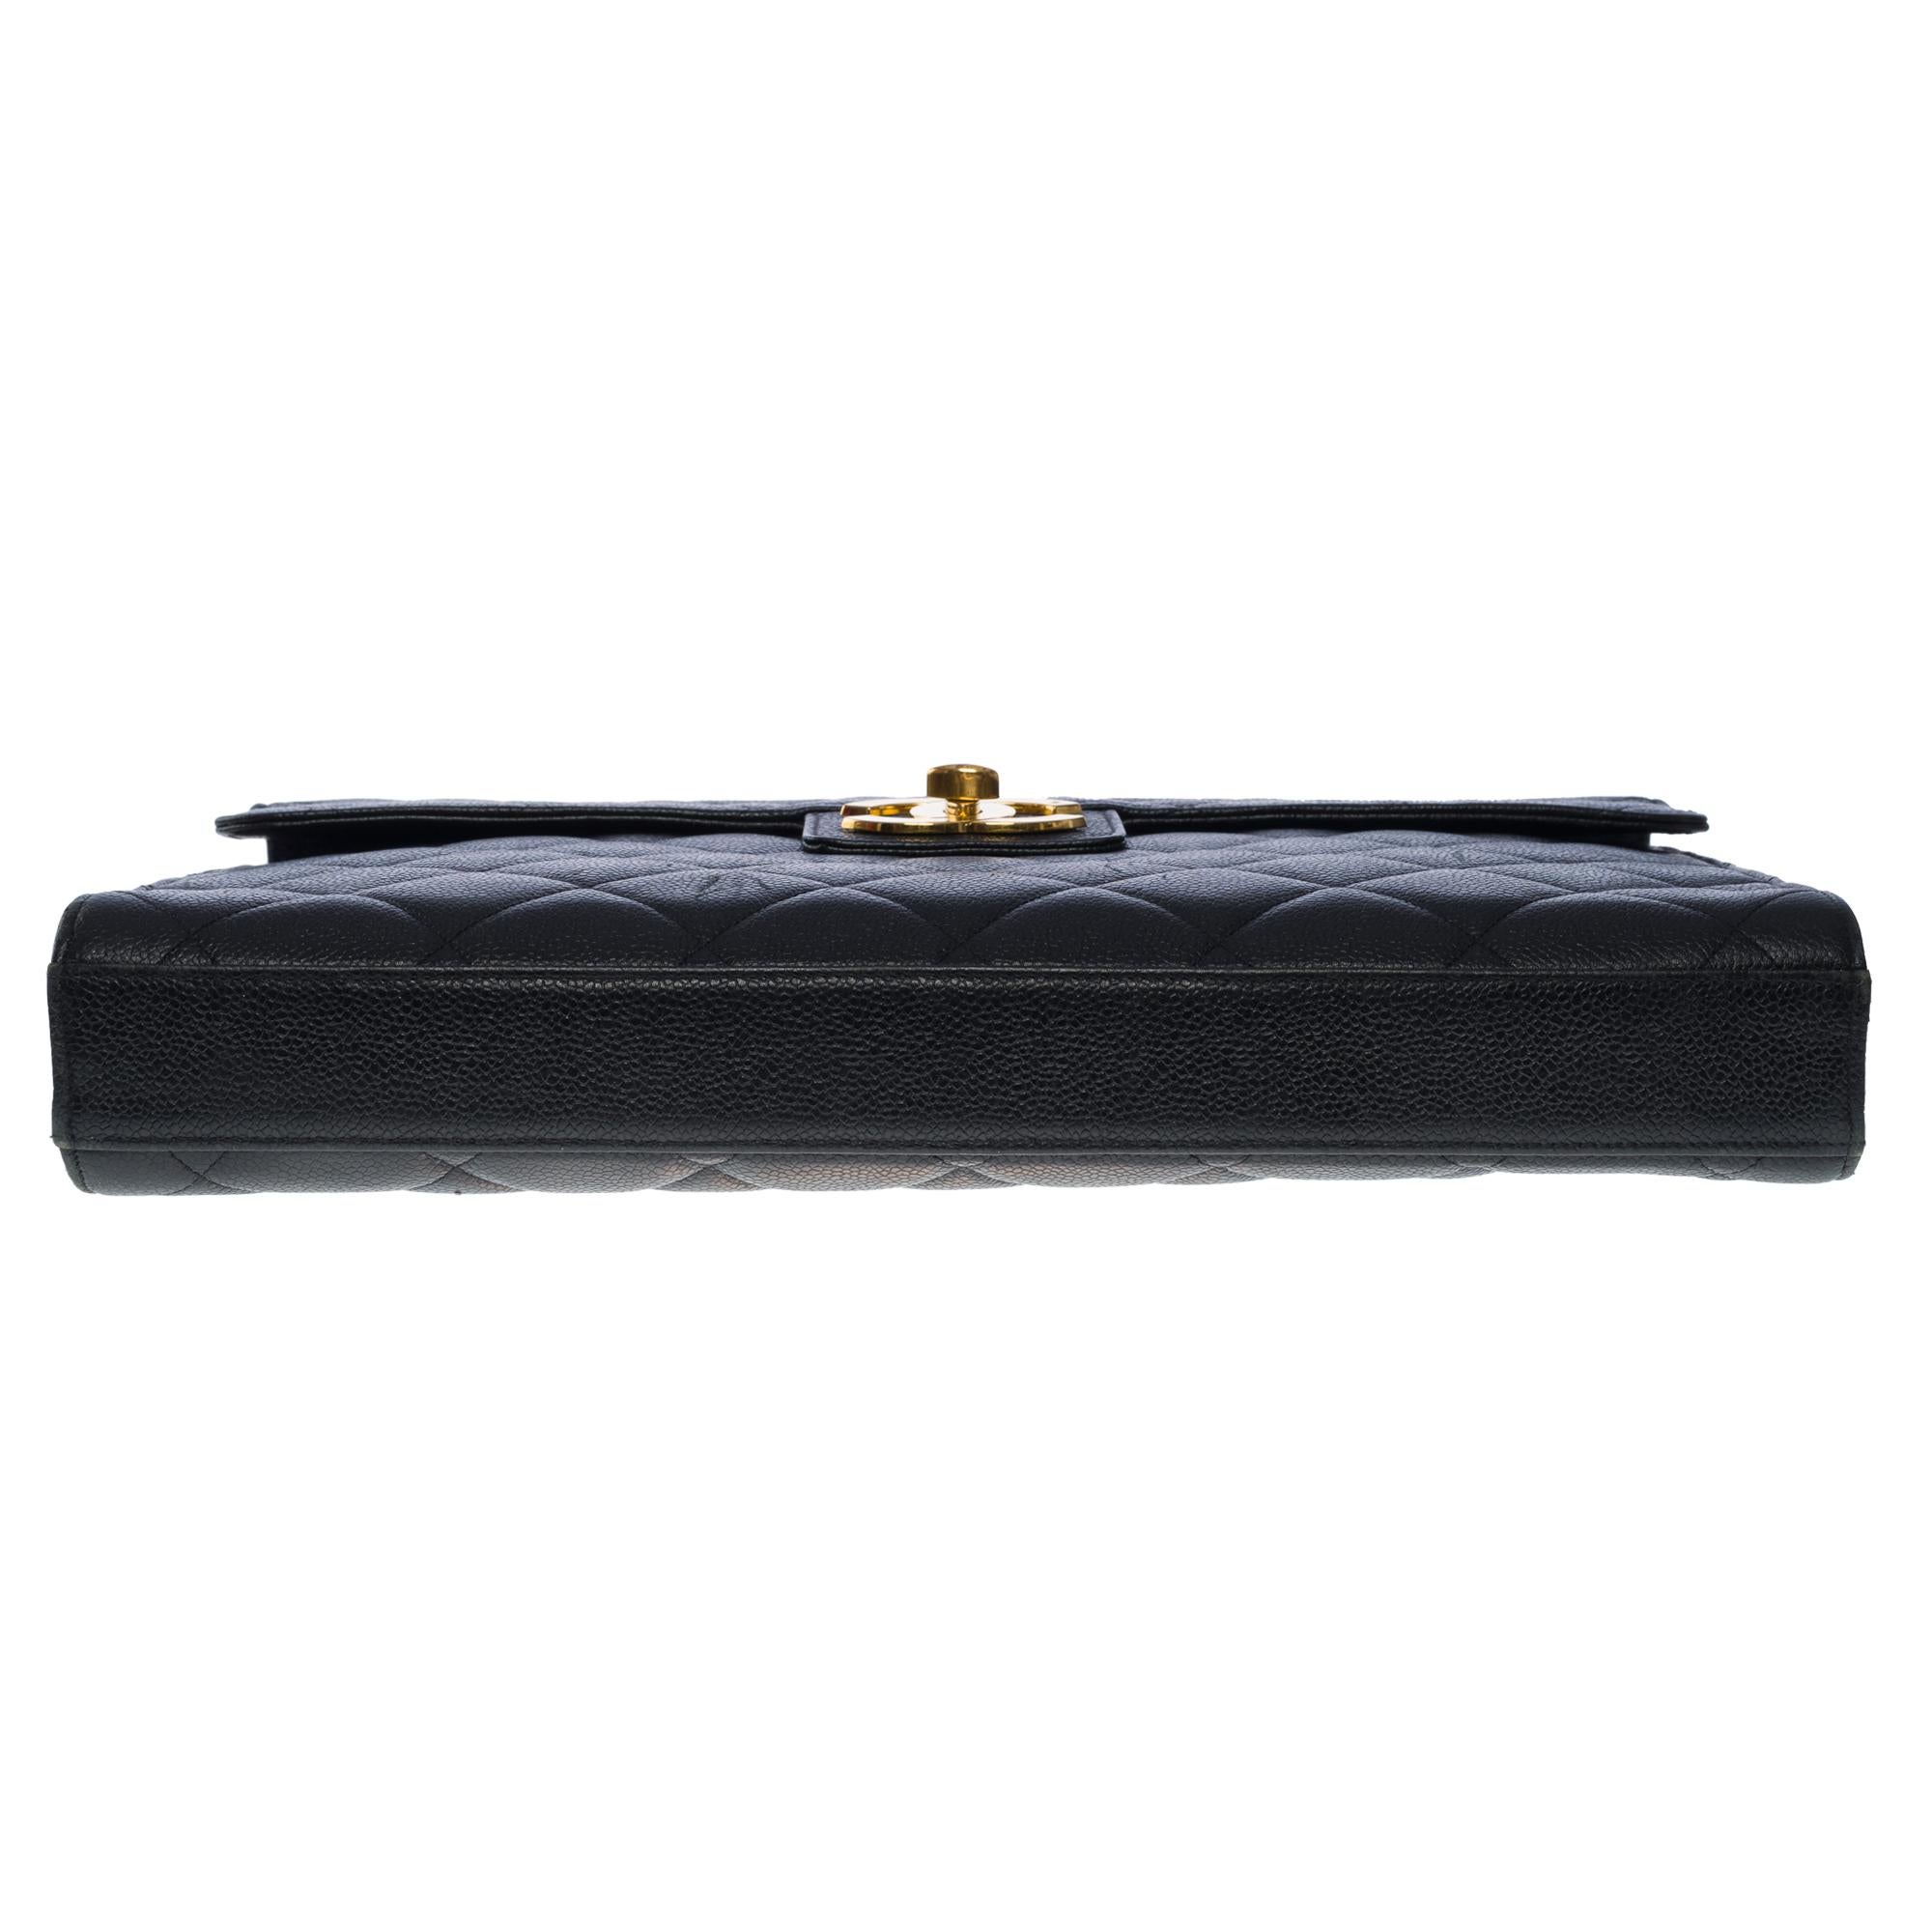 Amazing Chanel vintage Briefcase in black caviar leather, GHW 4